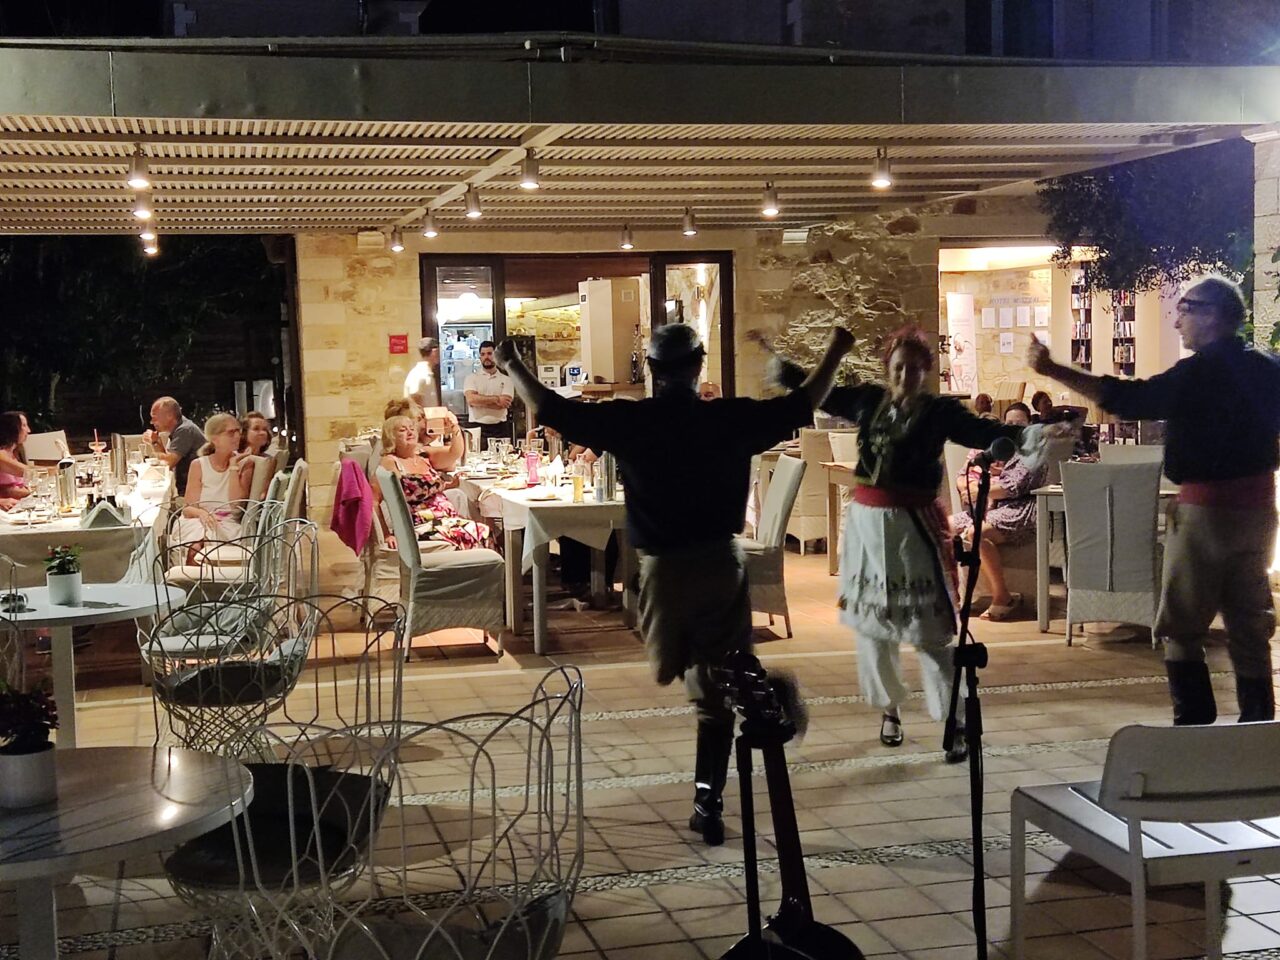 traditional-cretan-and-greek-dances-performed-for-solo-travellers-at-the-mistral-hotel-singles-holidays-crete-greece